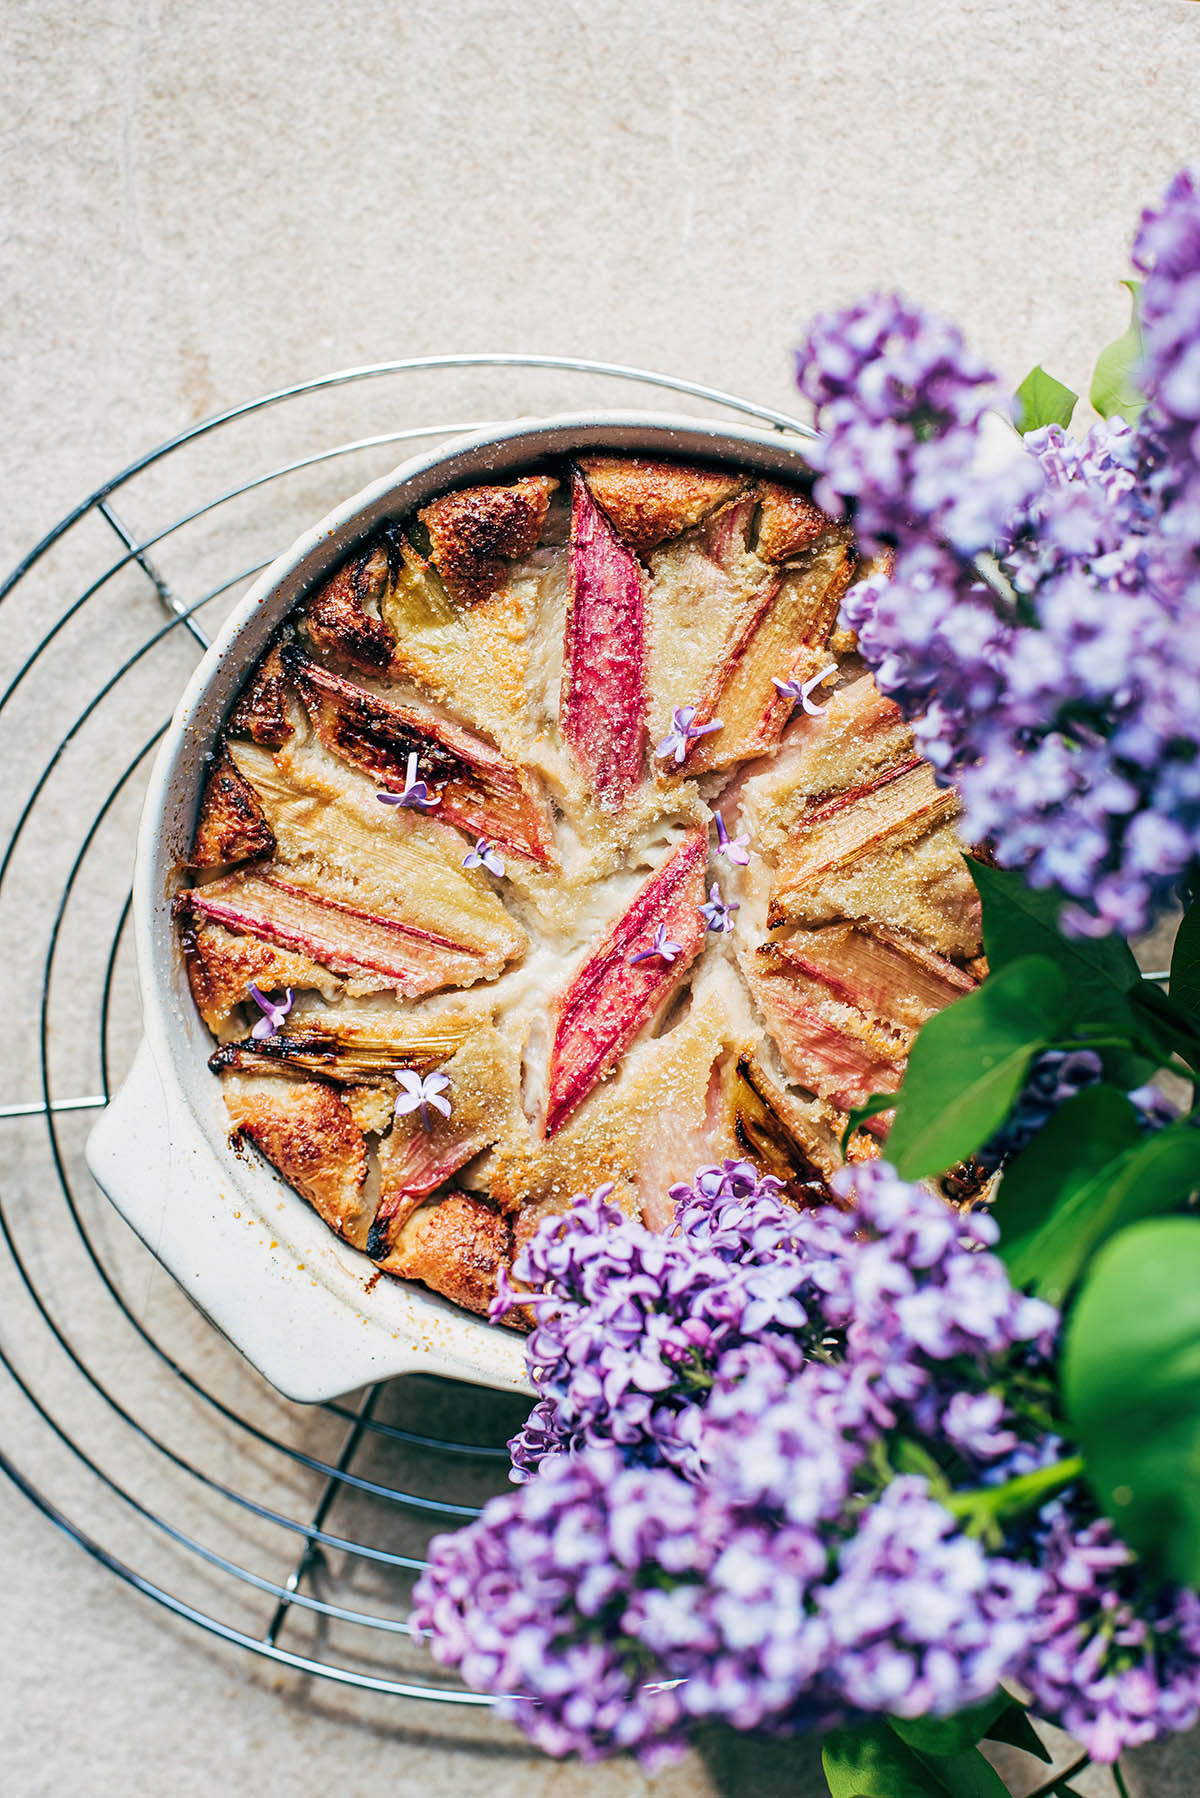 A rhubarb clafoutis on a cooling rack with lilac flowers in the foreground.